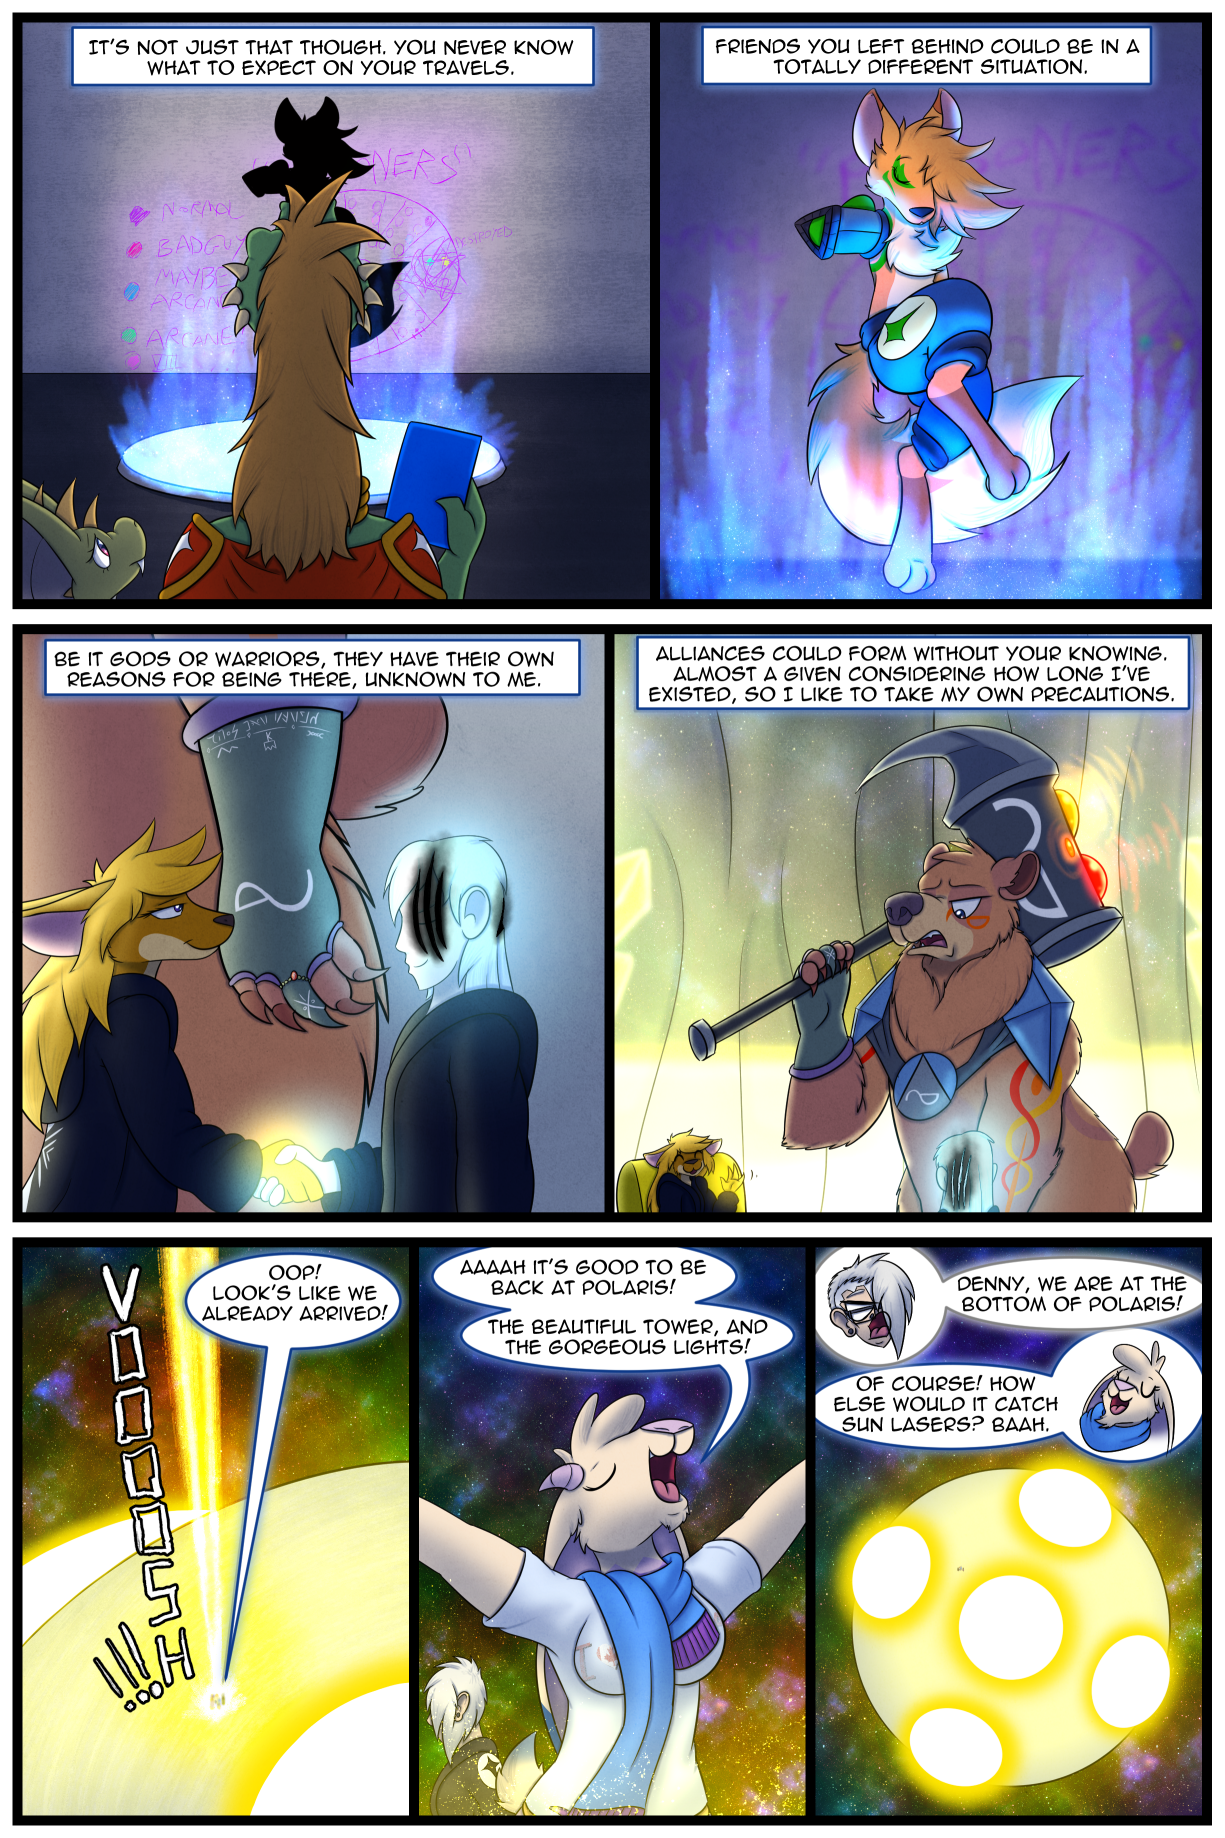 Ch6 Page 11 – Welcome Back